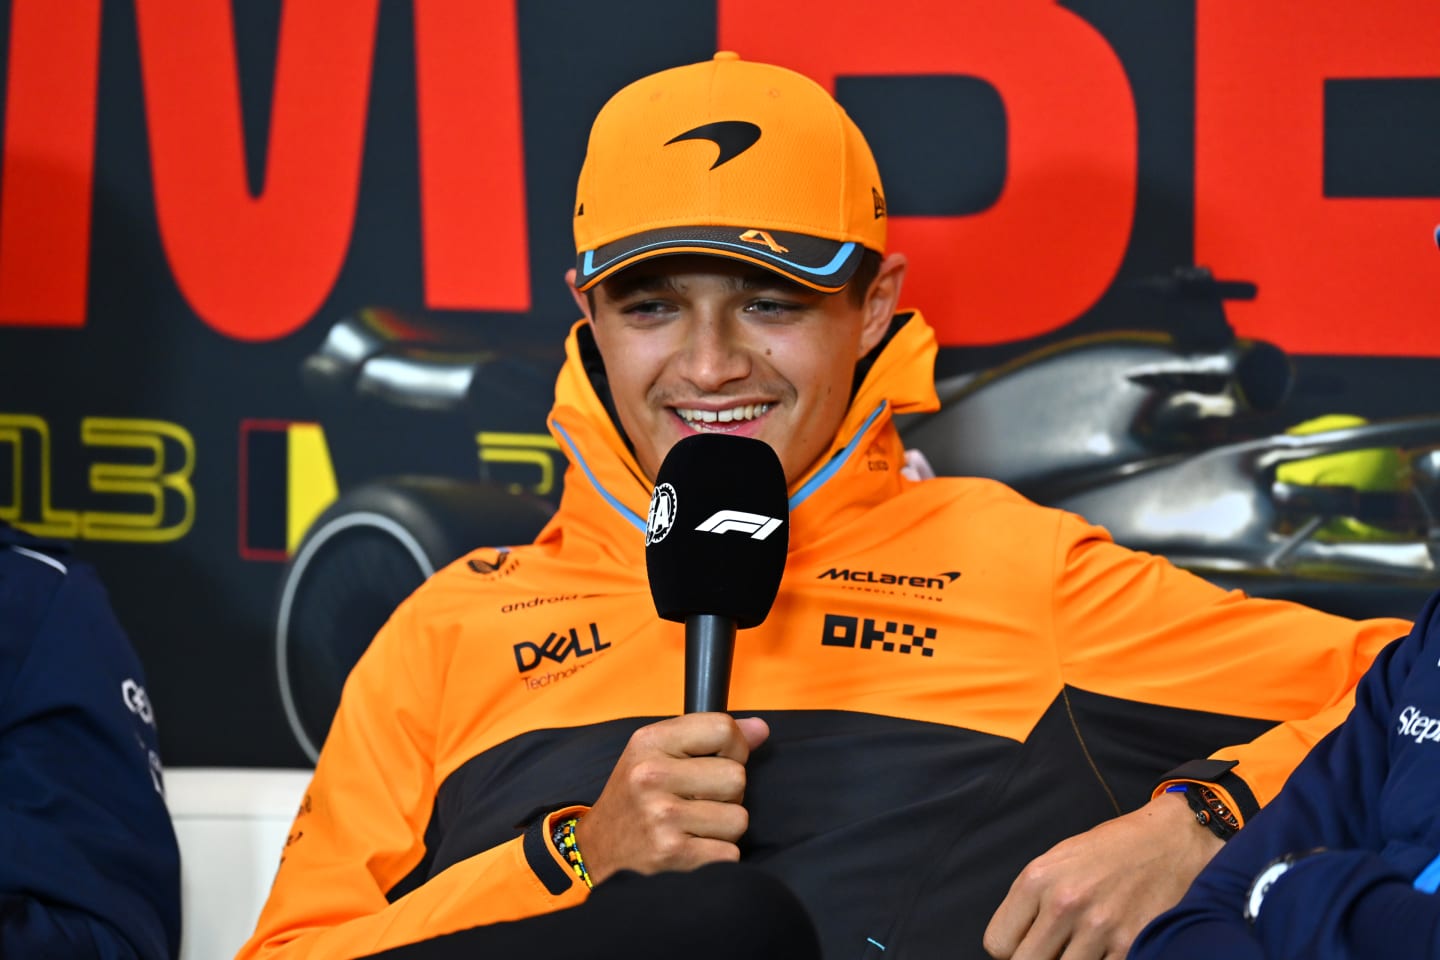 SPA, BELGIUM - JULY 27: Lando Norris of Great Britain and McLaren attends the Drivers Press Conference during previews ahead of the F1 Grand Prix of Belgium at Circuit de Spa-Francorchamps on July 27, 2023 in Spa, Belgium. (Photo by Dan Mullan/Getty Images)